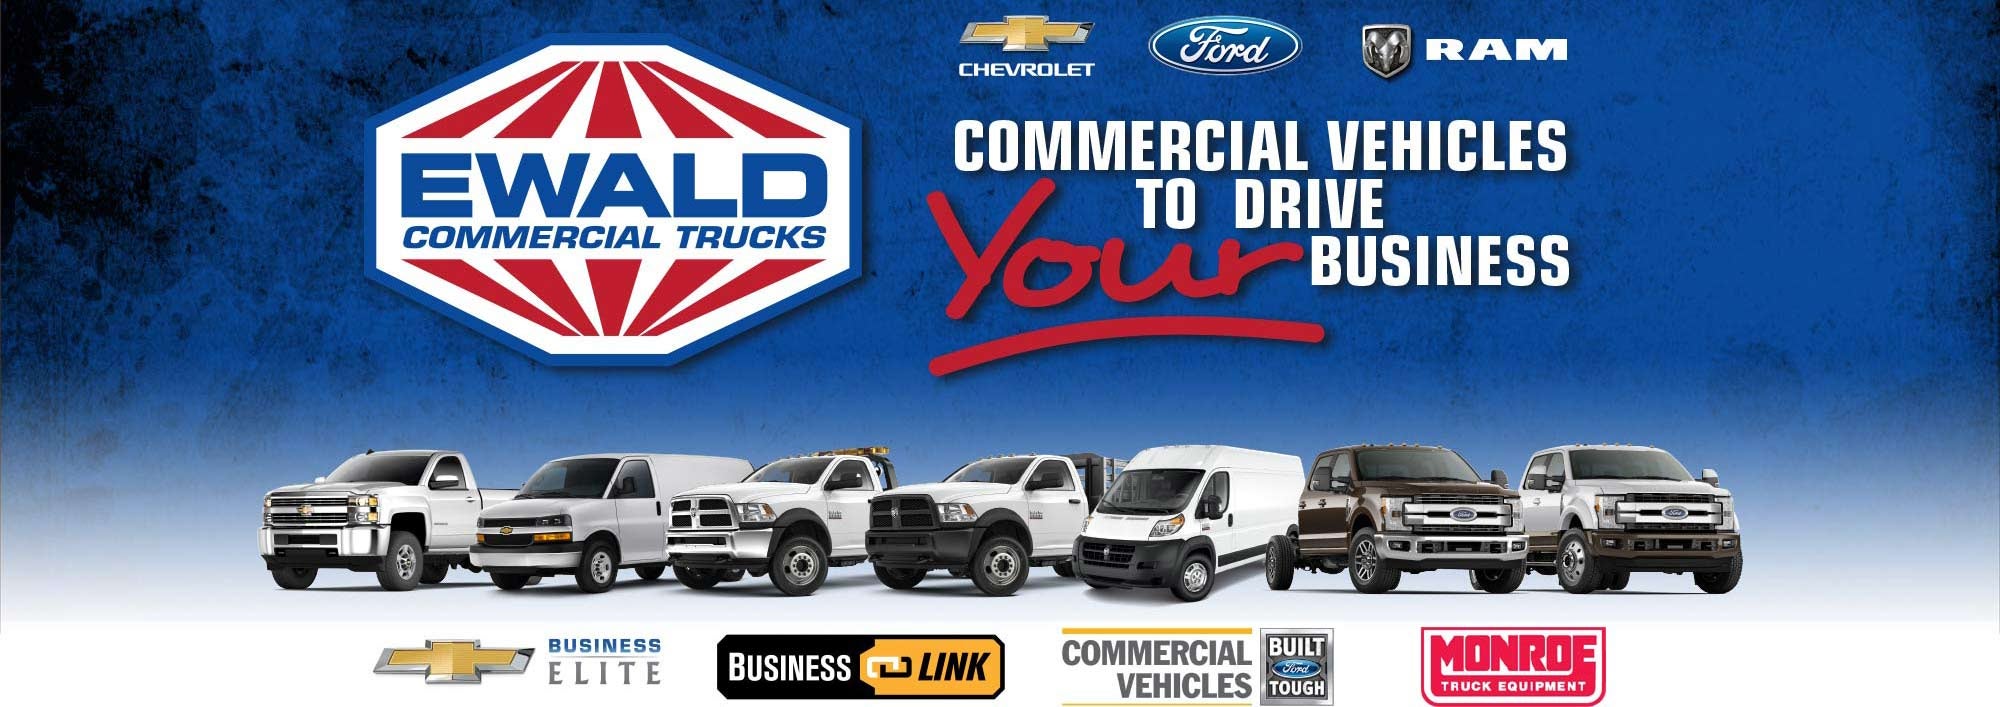 Ewald Automotive Group Commercial Vehicles to Drive Your Business